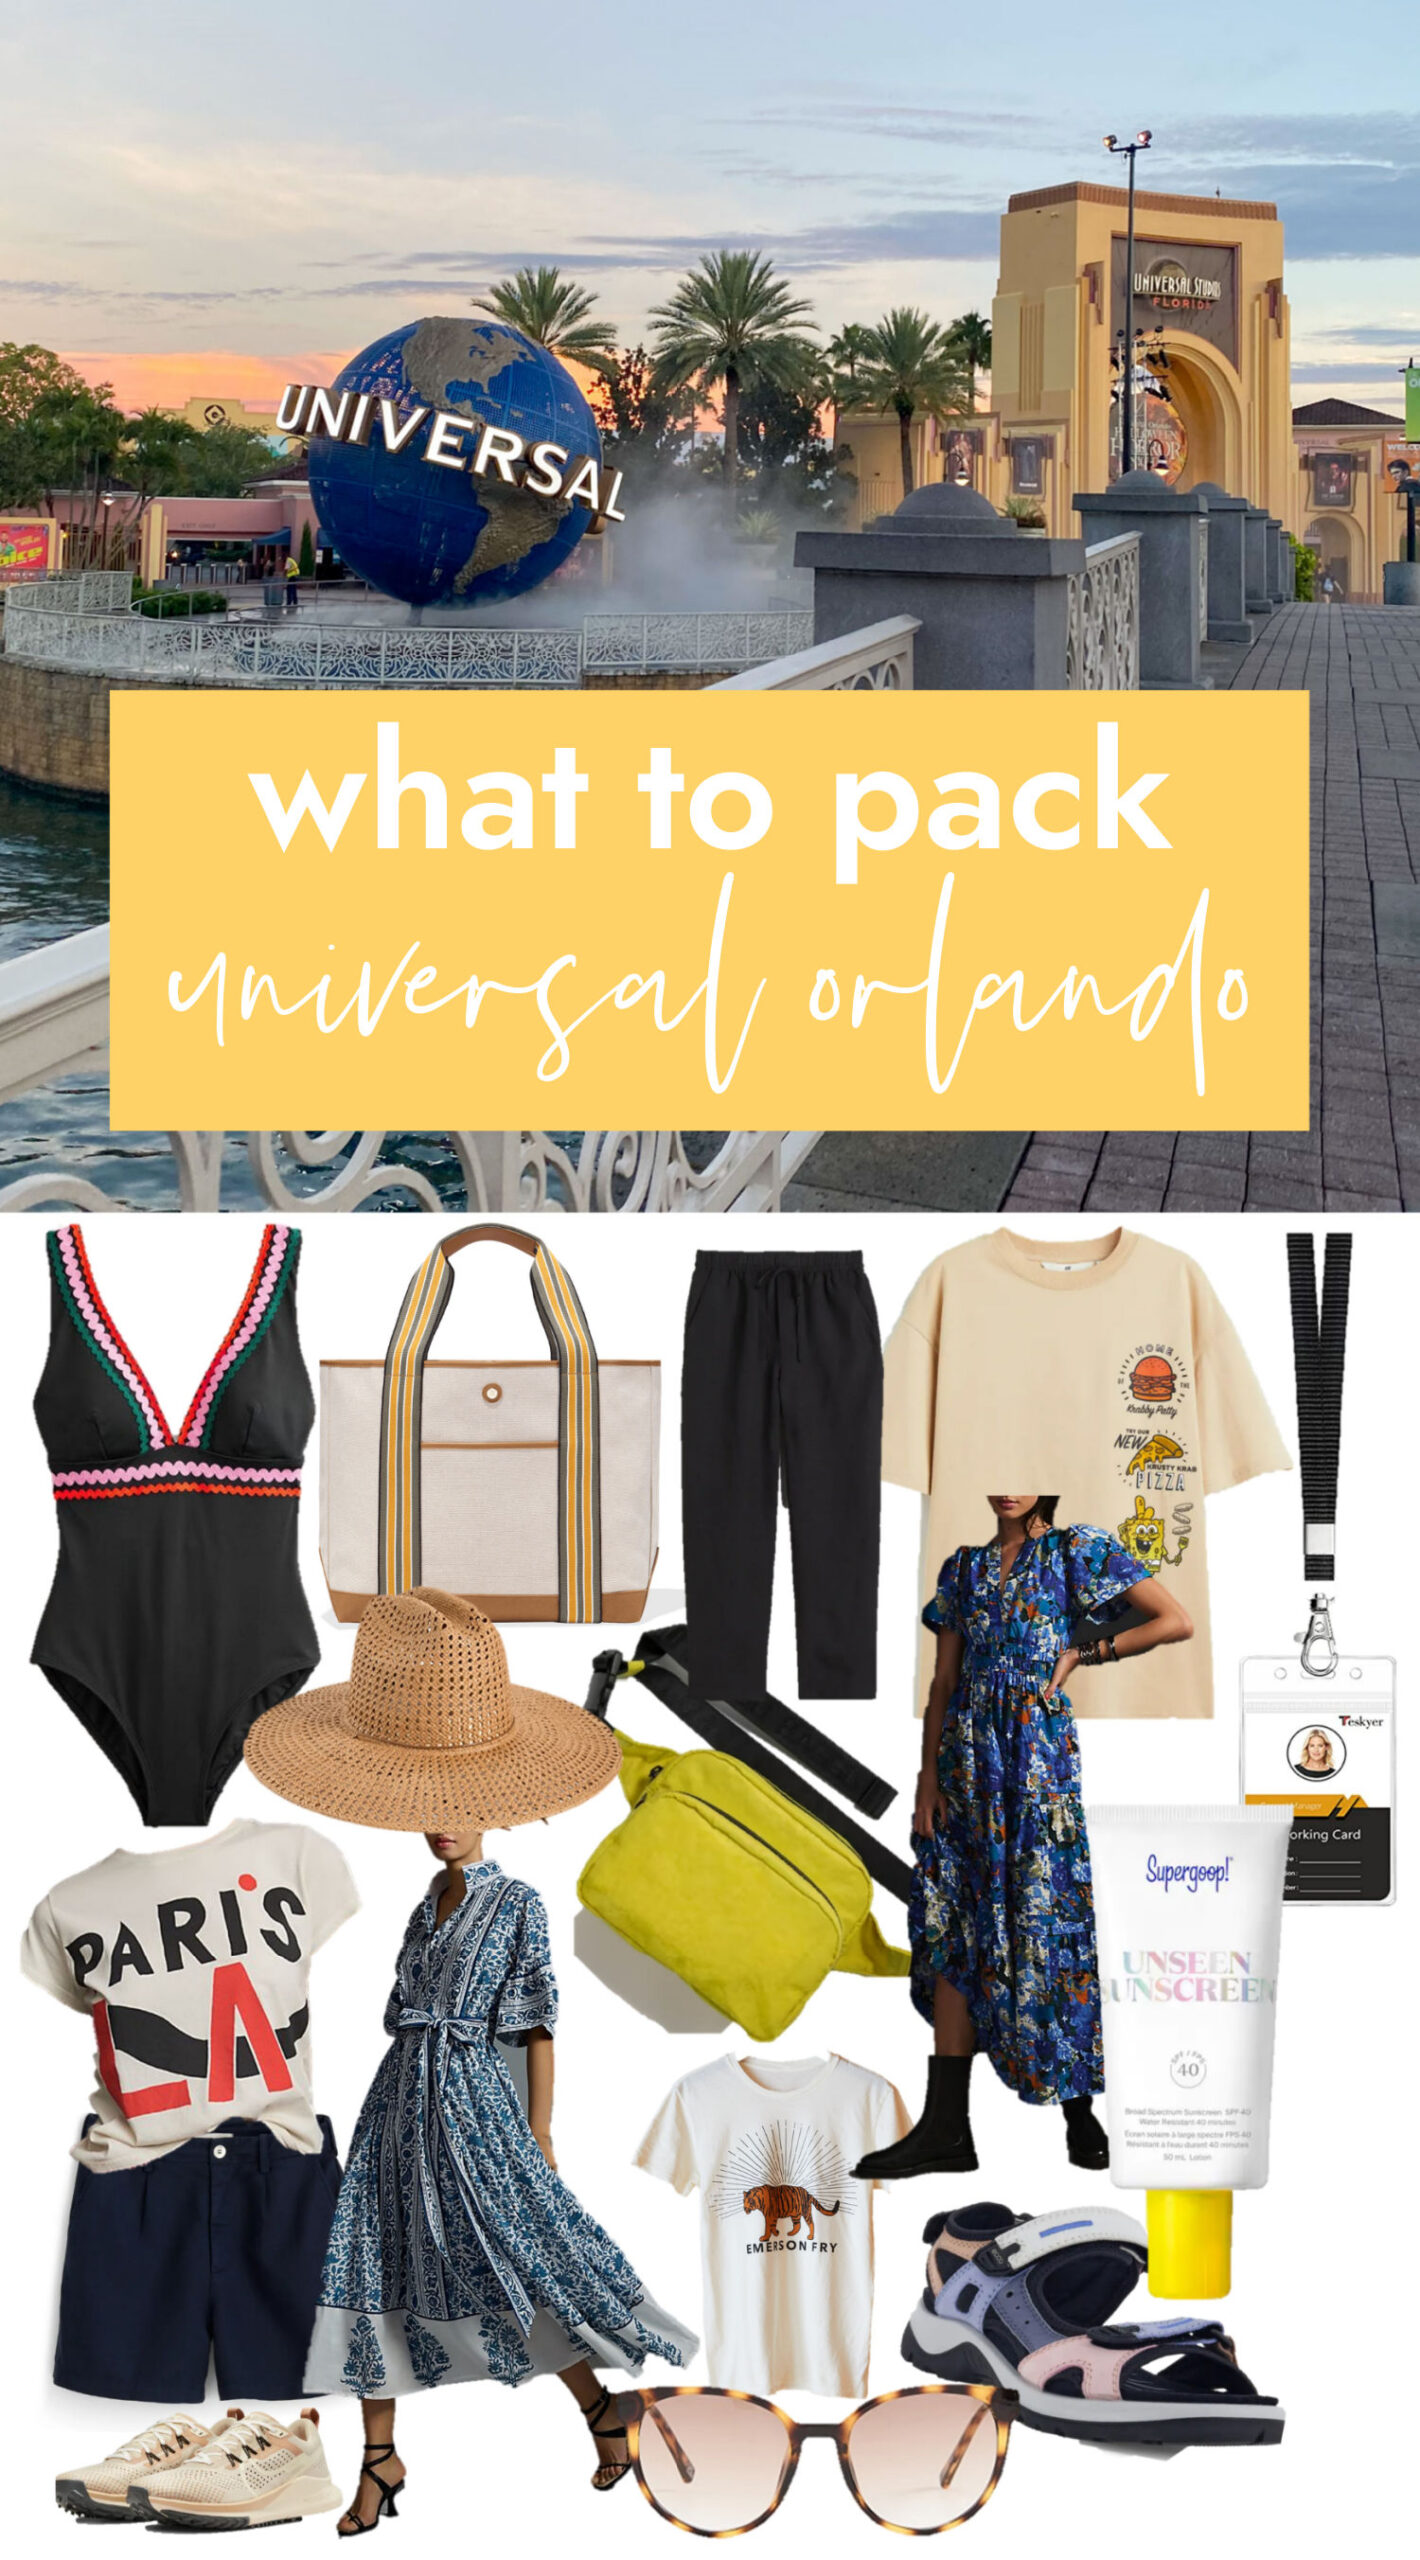 Universal Orlando packing list, what to pack for Universal Studios